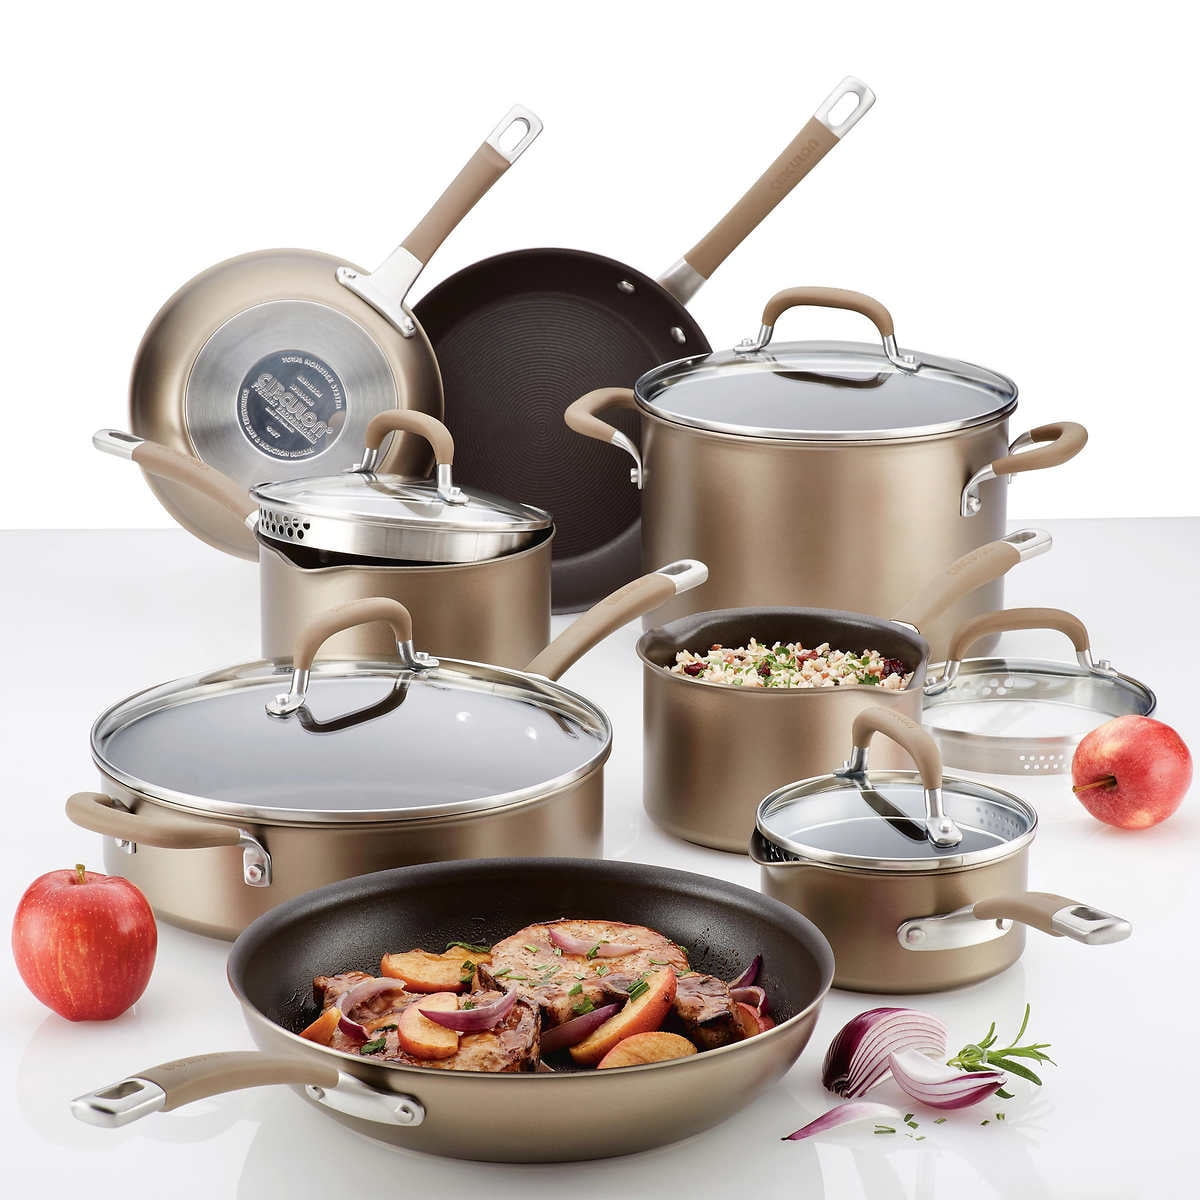 Circulon Cookware Review (Is It Any Good?) - Prudent Reviews